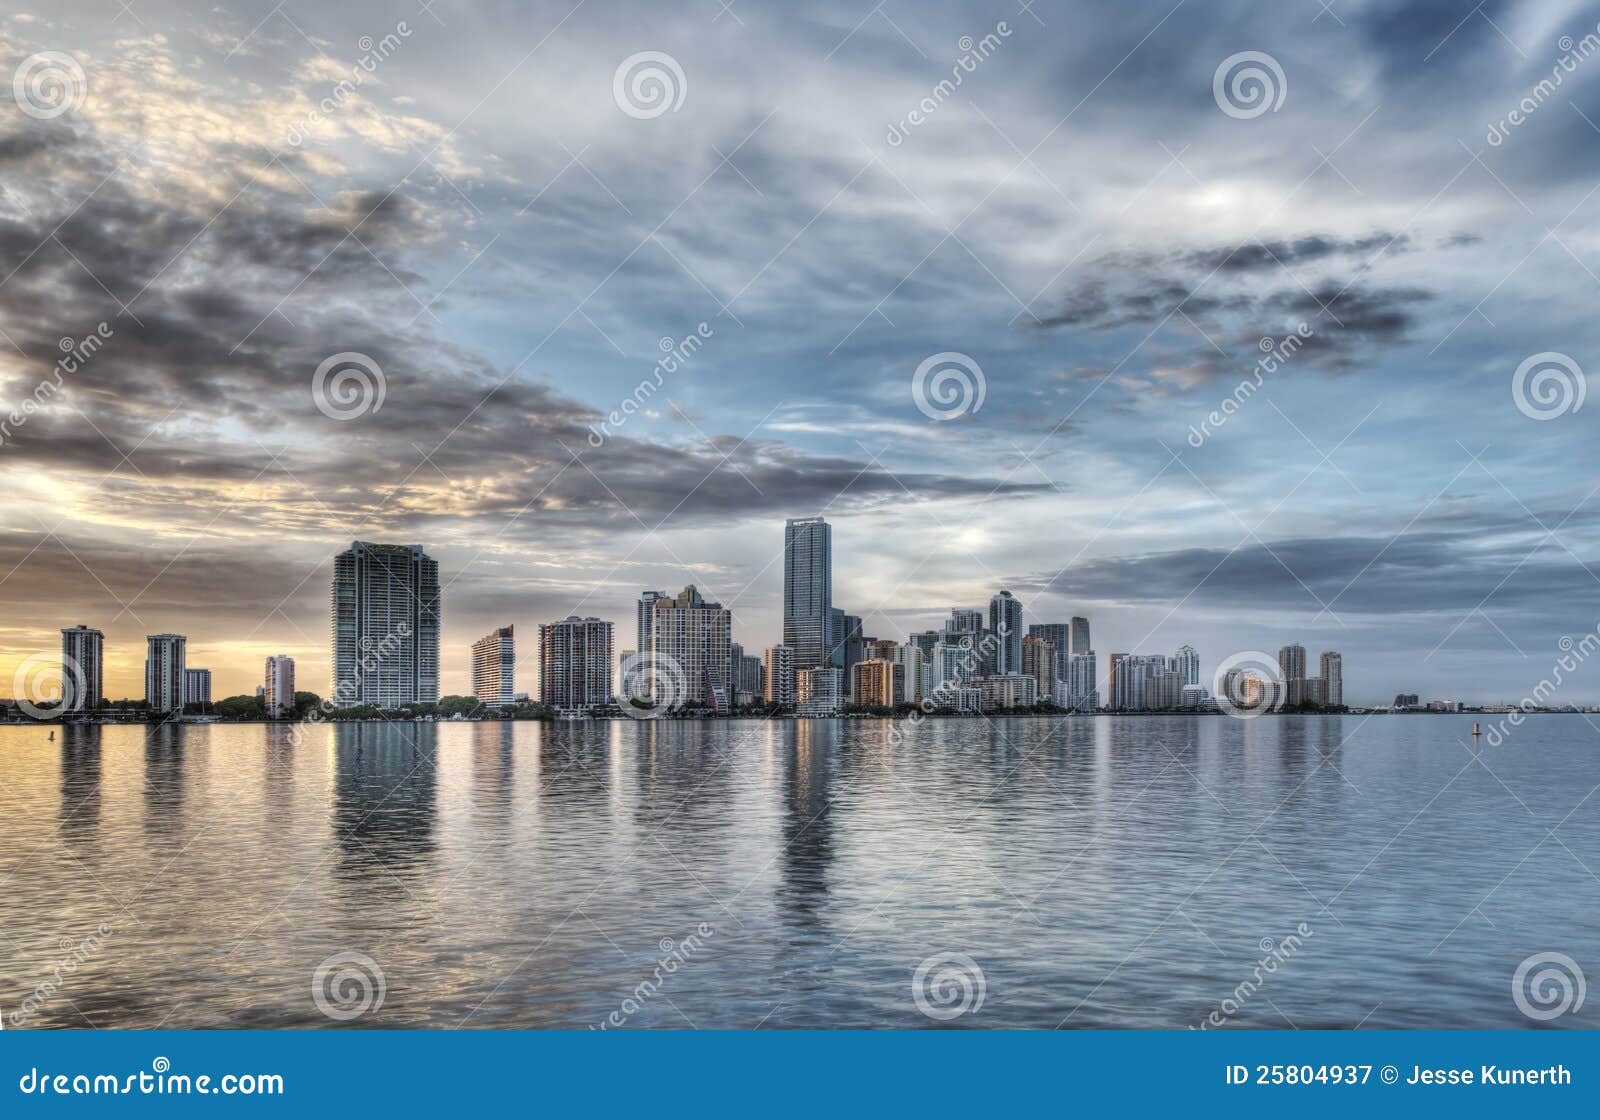 hdr of miami skyline